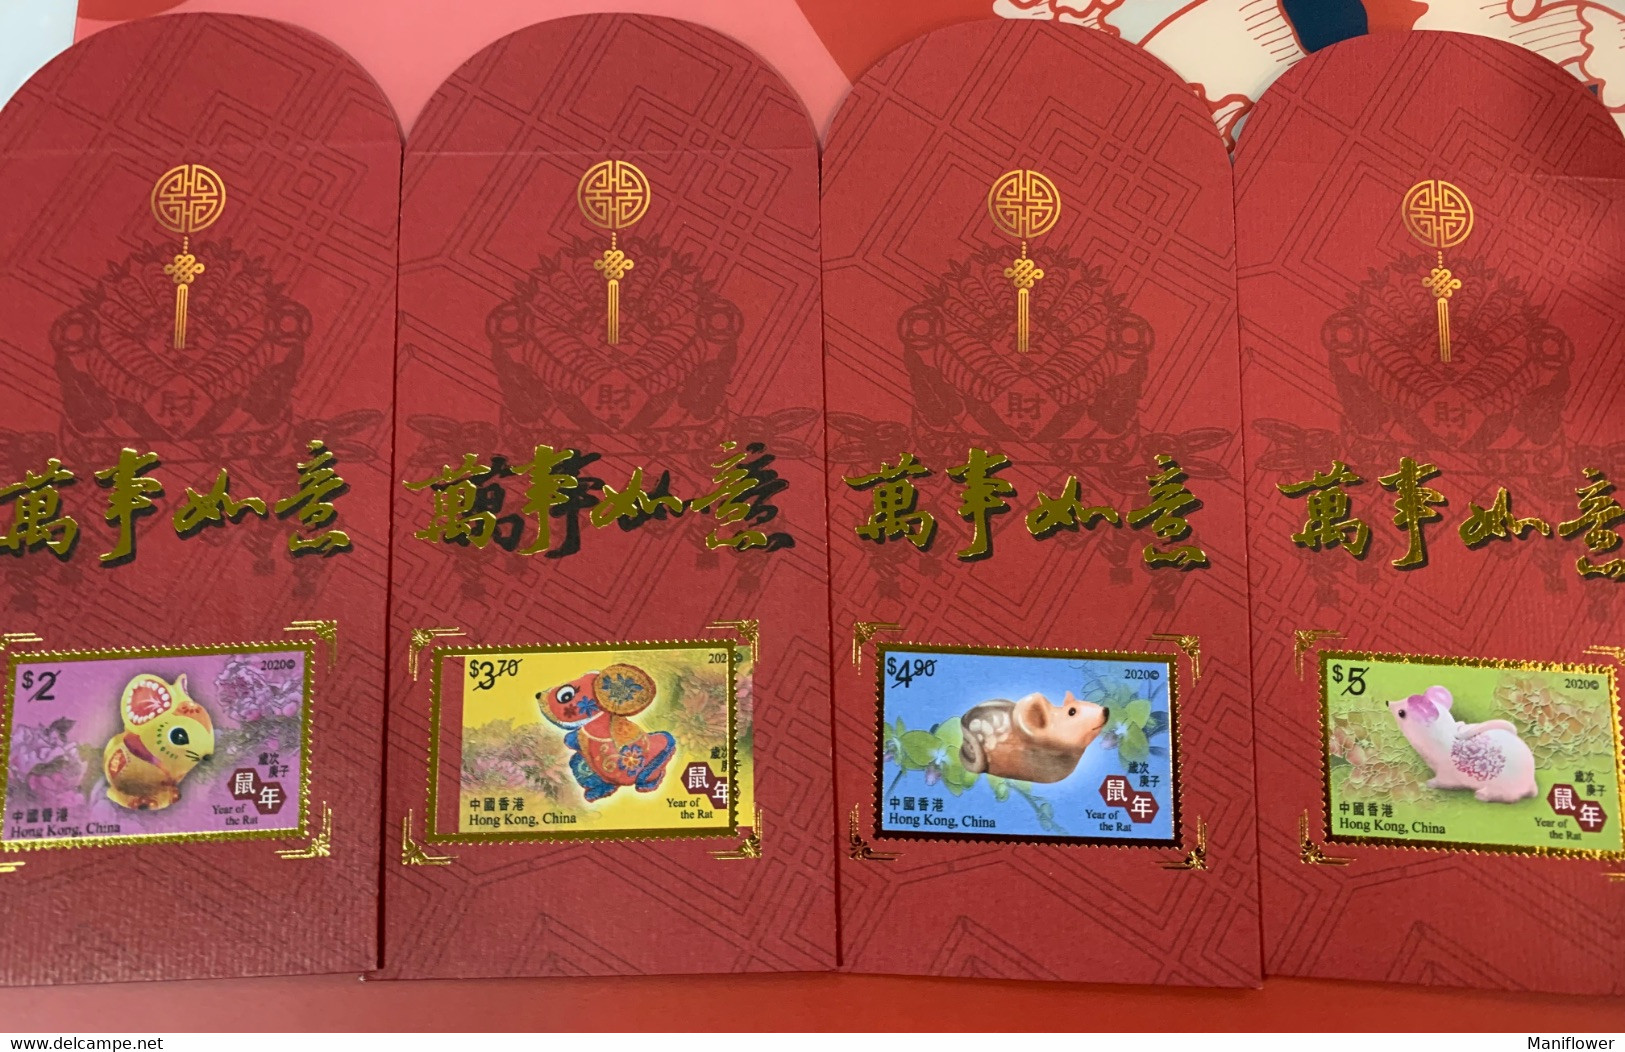 Hong Kong Post Issued Lucky Bag For Chinese New Year Mouse X 4 Kinds - Postal Stationery